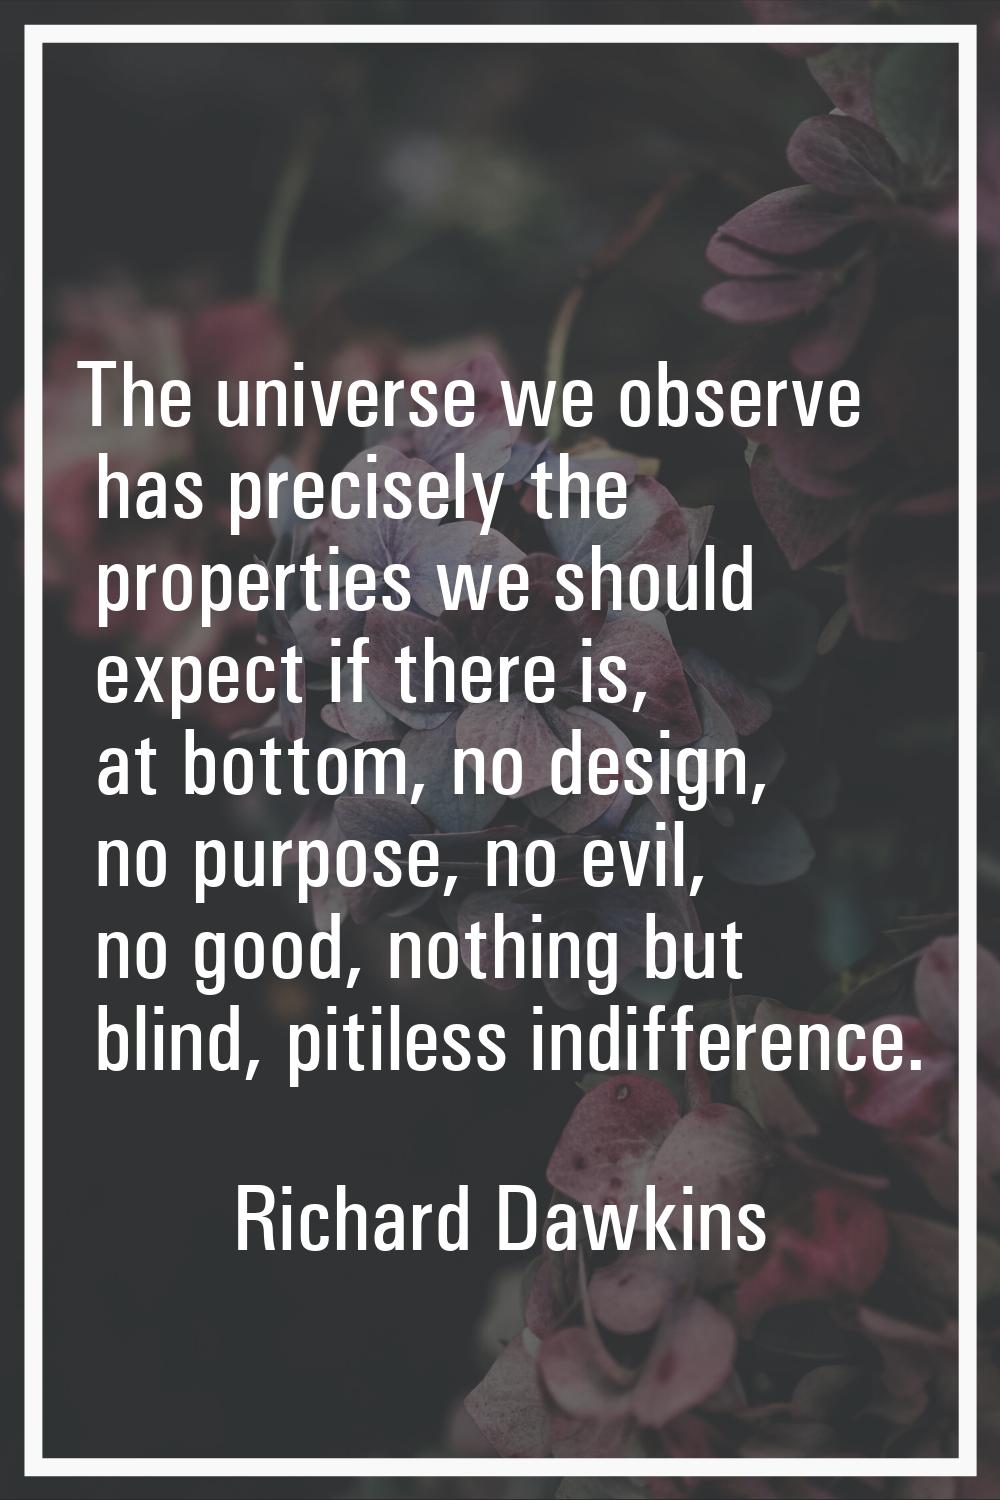 The universe we observe has precisely the properties we should expect if there is, at bottom, no de